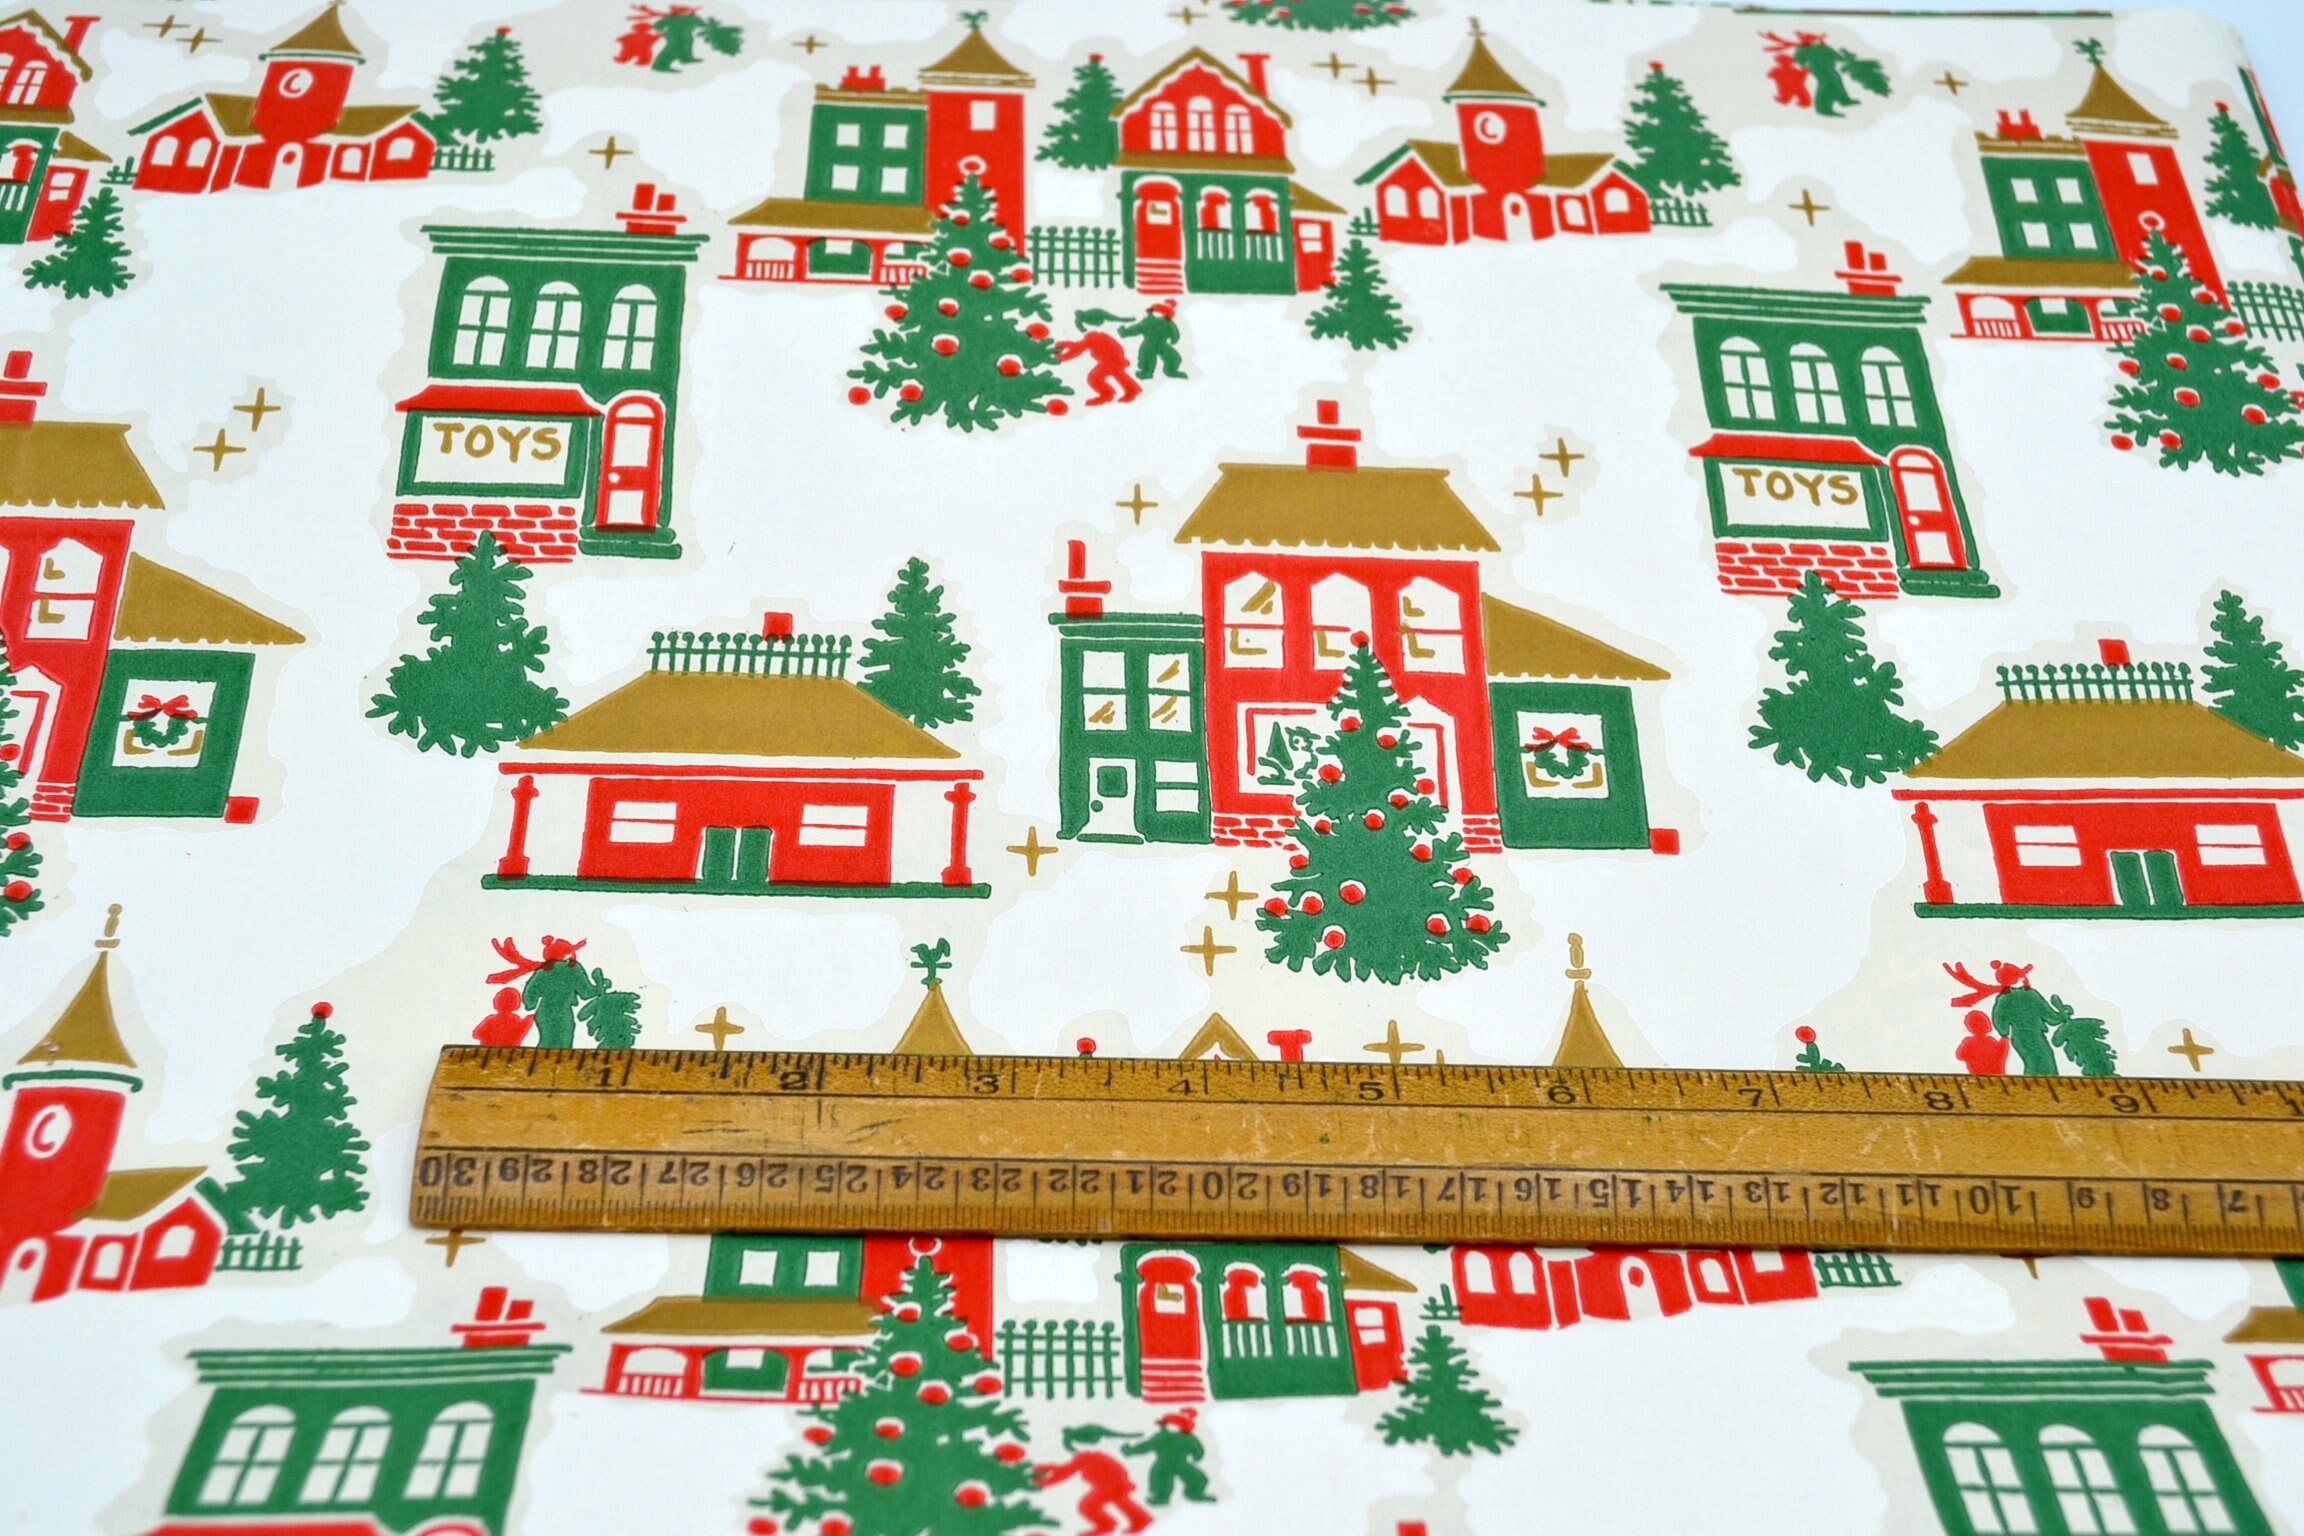 Vintage 1950s Christmas Wrapping Paper Christmas Gift Wrap NOS Christmas  Songs and Churches Unused Vintage Paper Vintage Christmas Decor